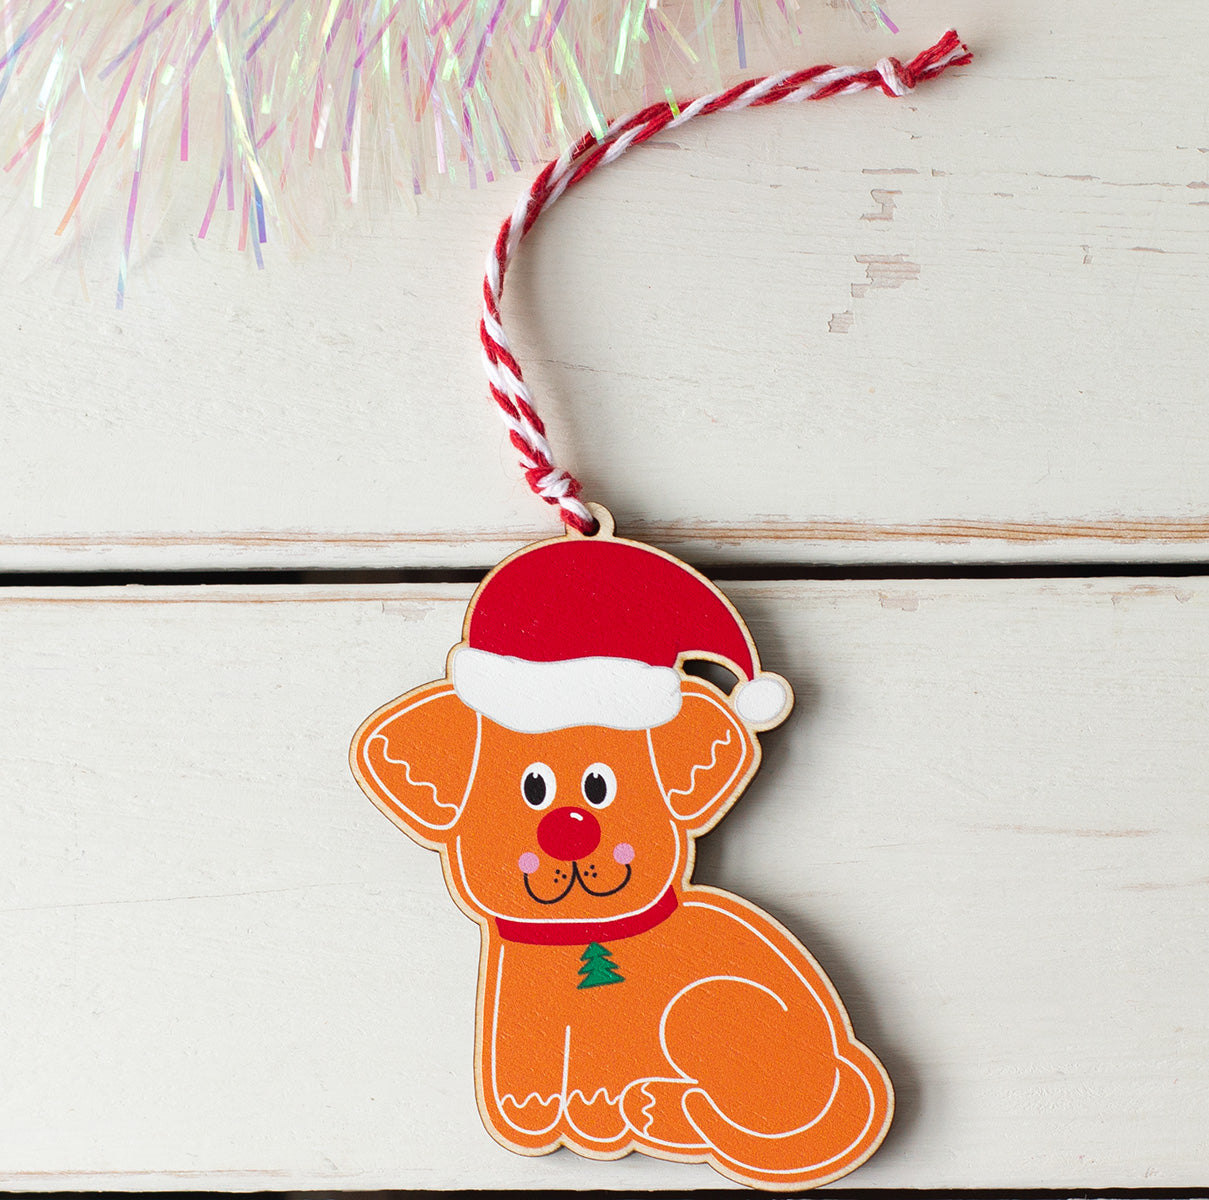 Wooden tree decoration of a dog with a red nose and santa hat illustrated in a gingerbread style, printed on to maple veneered MDF.